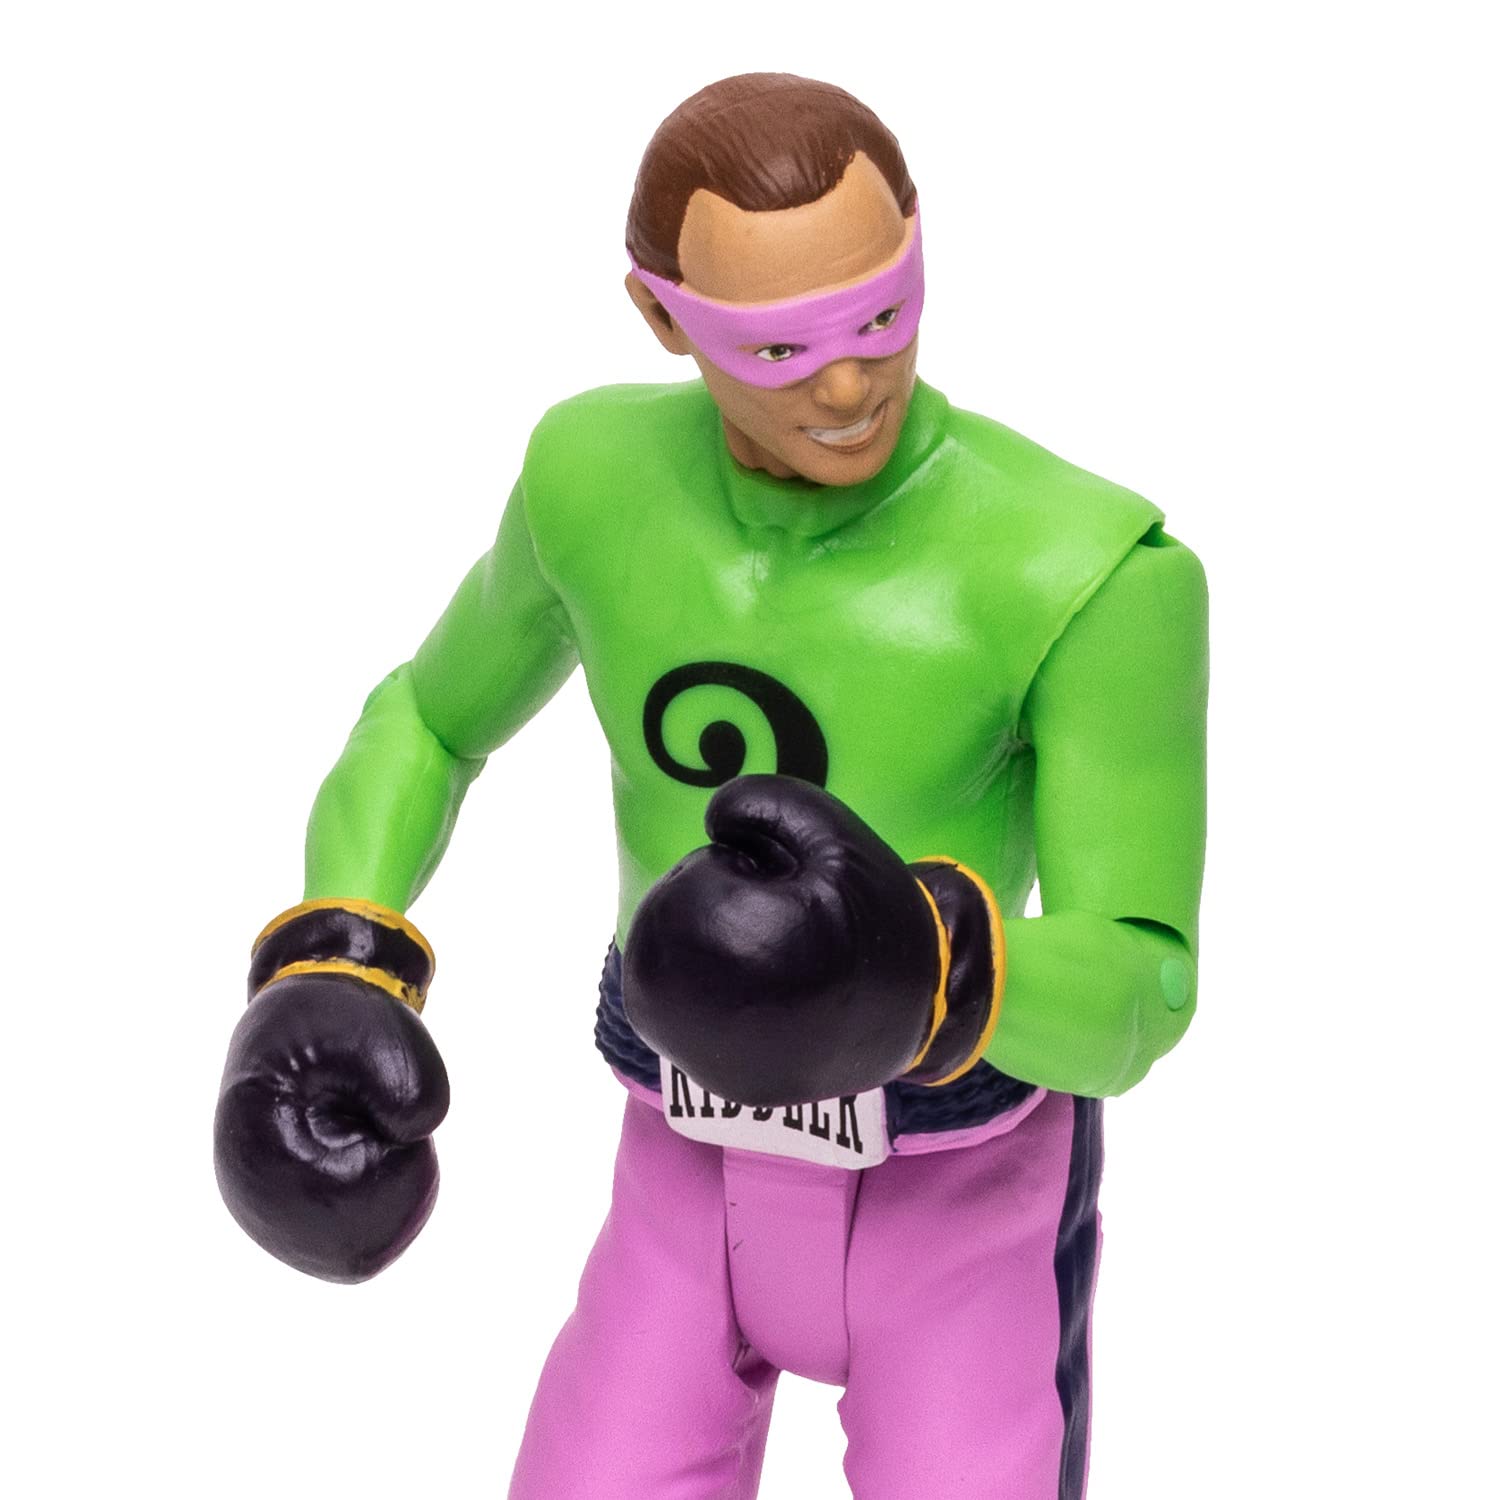 McFarlane Toys, DC Multiverse, 5-inch DC Retro Boxing Riddler Figure with Action Word Bubbles, Boxing Riddler Action Figure Collectible DC Retro 1960's TV Figure – Ages 12+